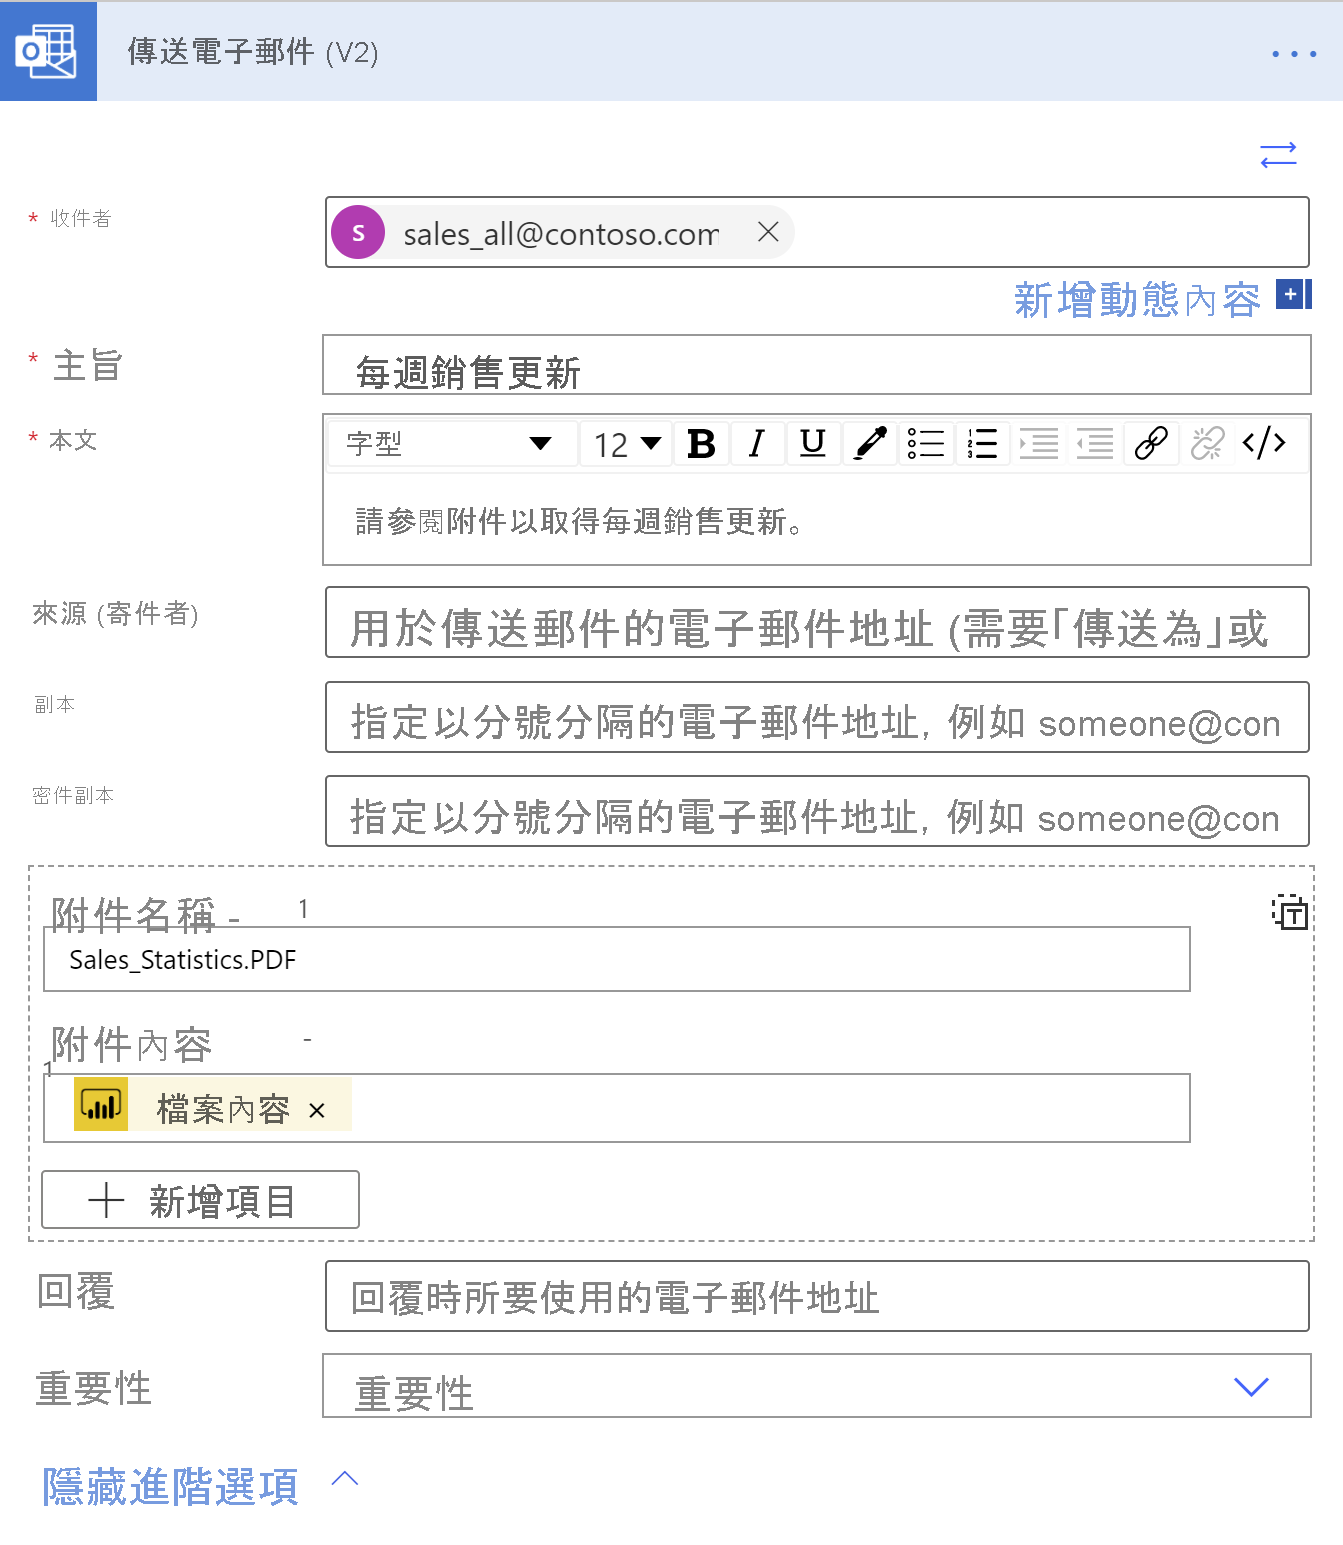 Screenshot showing the send an email dialog.